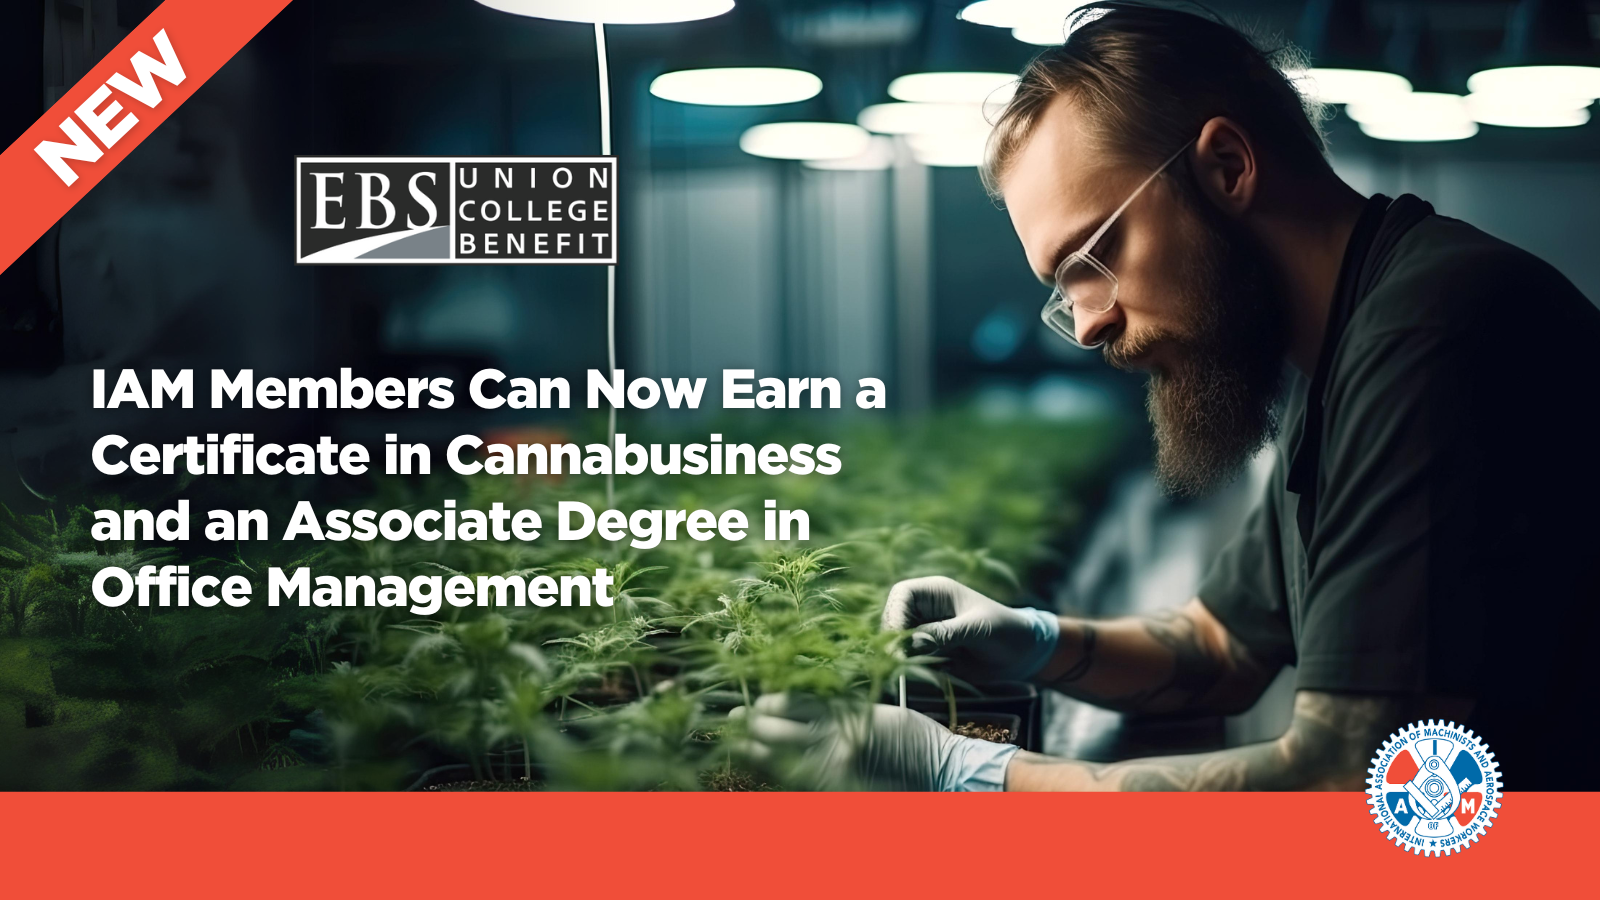 IAM Members Can Now Enhance Their Education by Earning a Certificate in Cannabusiness and an Associate Degree in Office Management